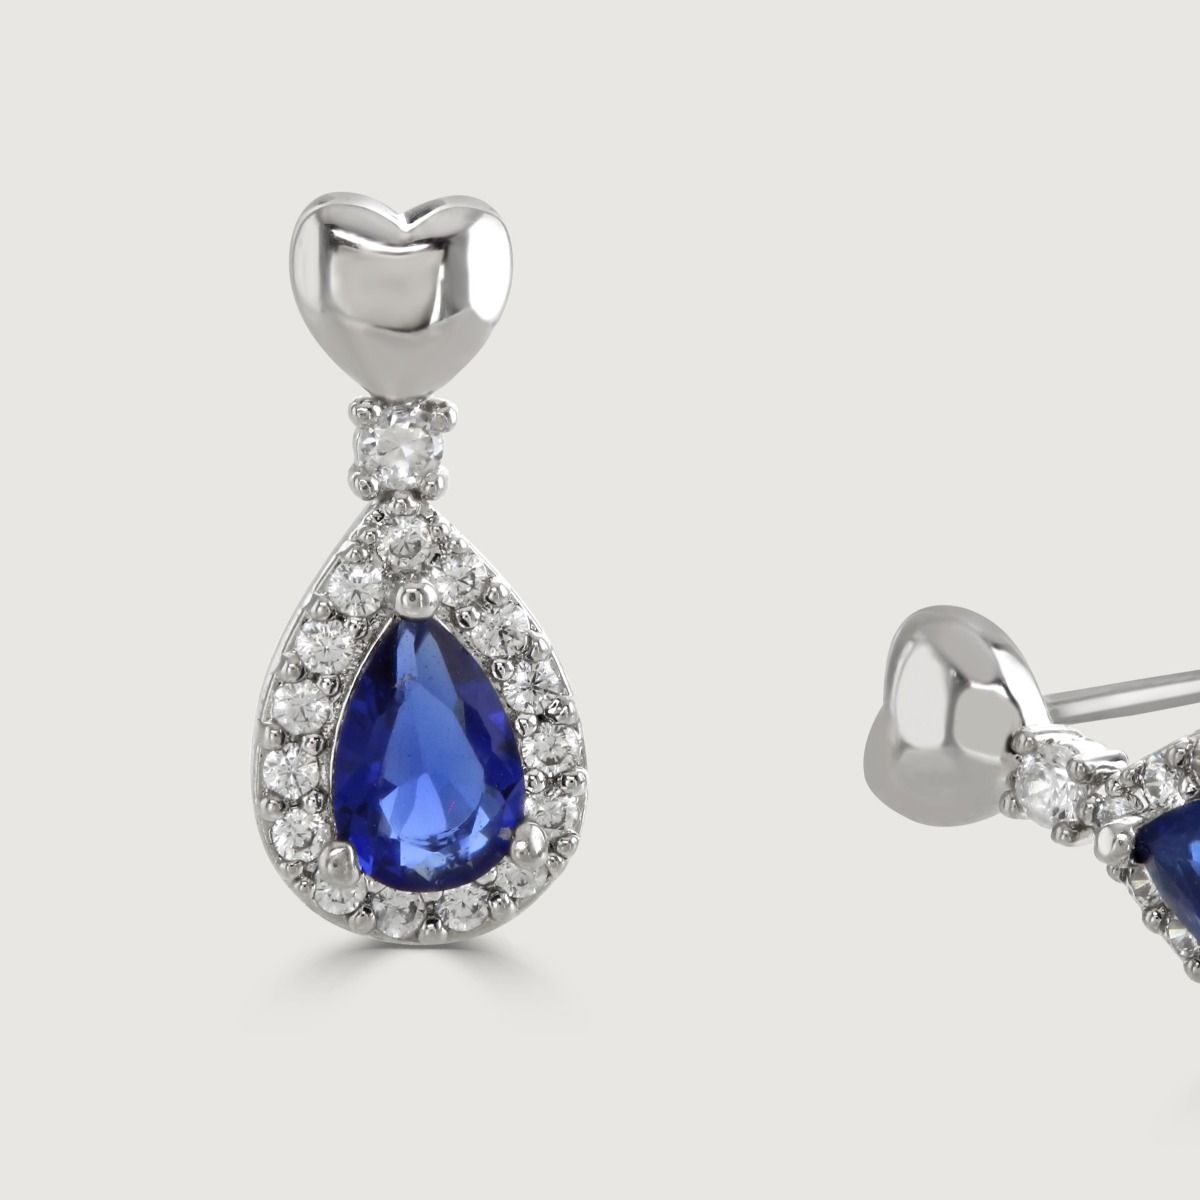 Discover elegance with our Sapphire Heart Pear-Drop Earrings. Enhanced by cubic zirconia pear-drop band, it features a polished heart at the stud. The enchanting focal point is a captivating sapphire stone.